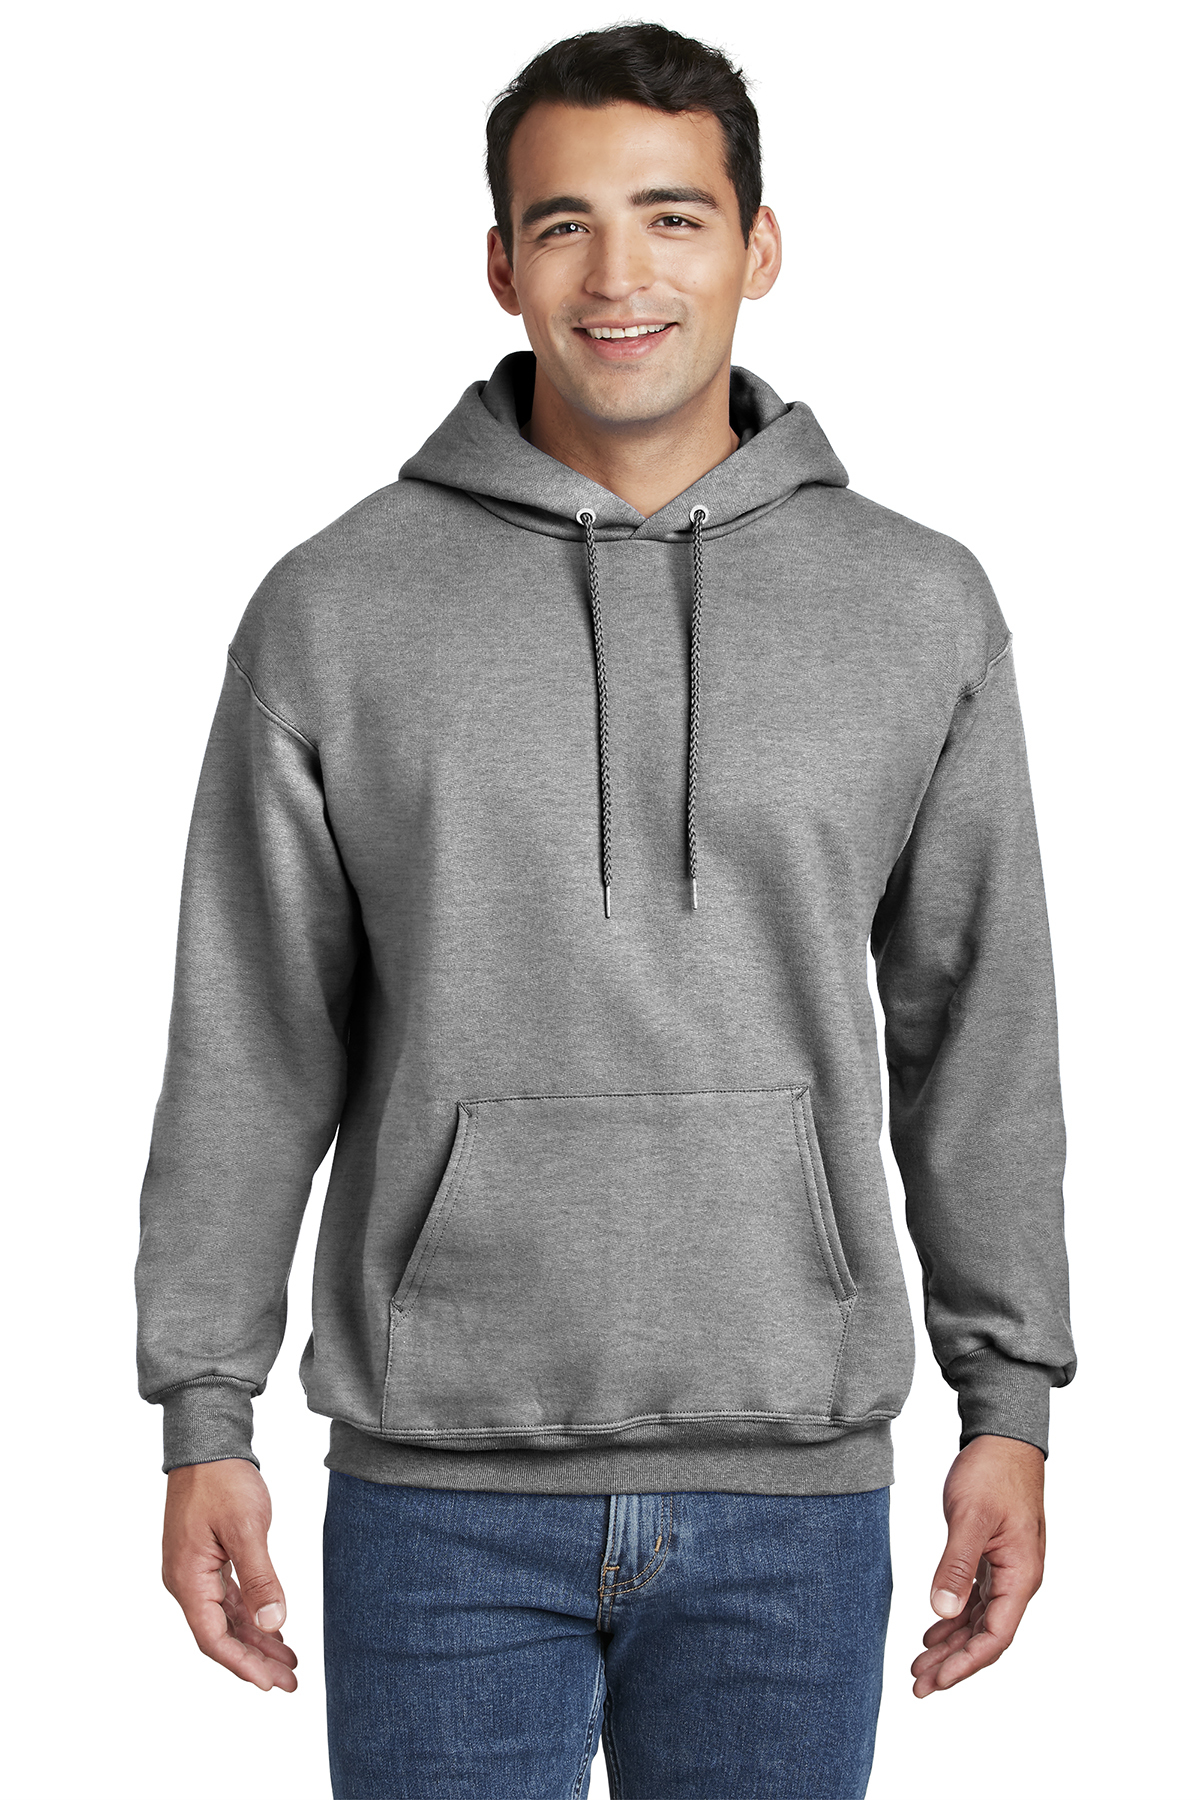 Hanes Ultimate Cotton - Pullover Hooded Sweatshirt | Product | Company ...